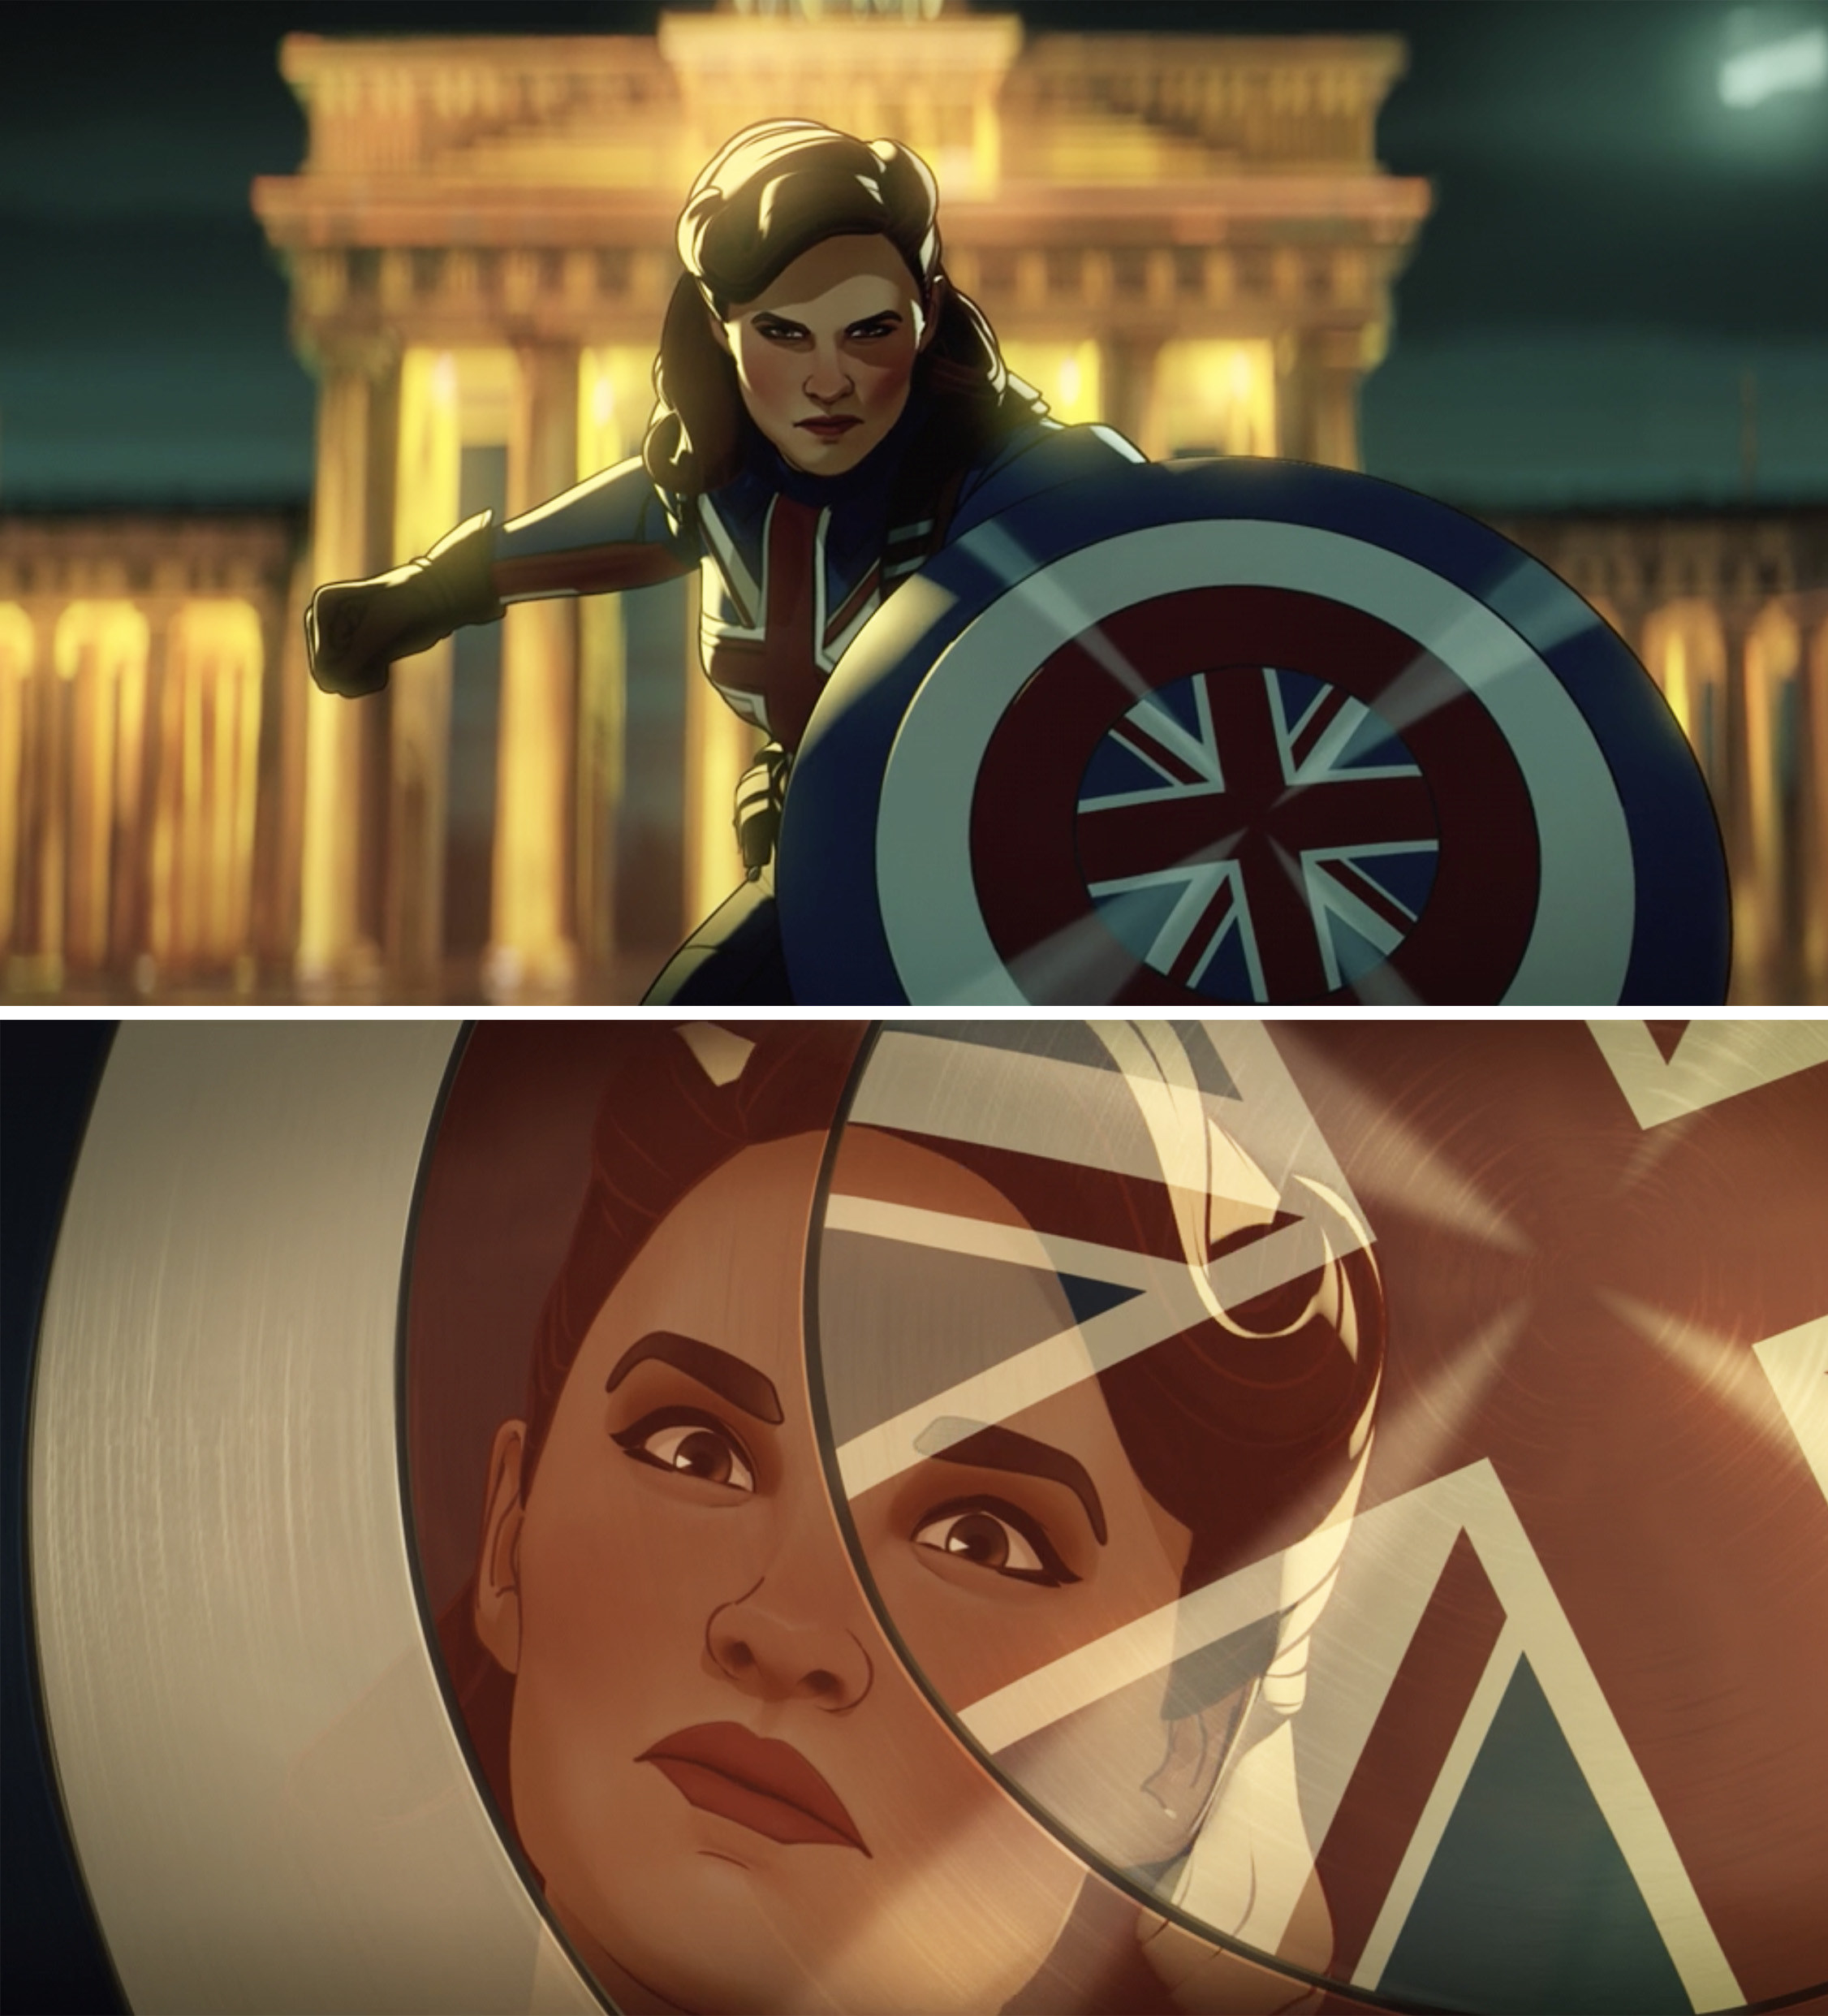 Peggy wielding her shield with the English flag on it